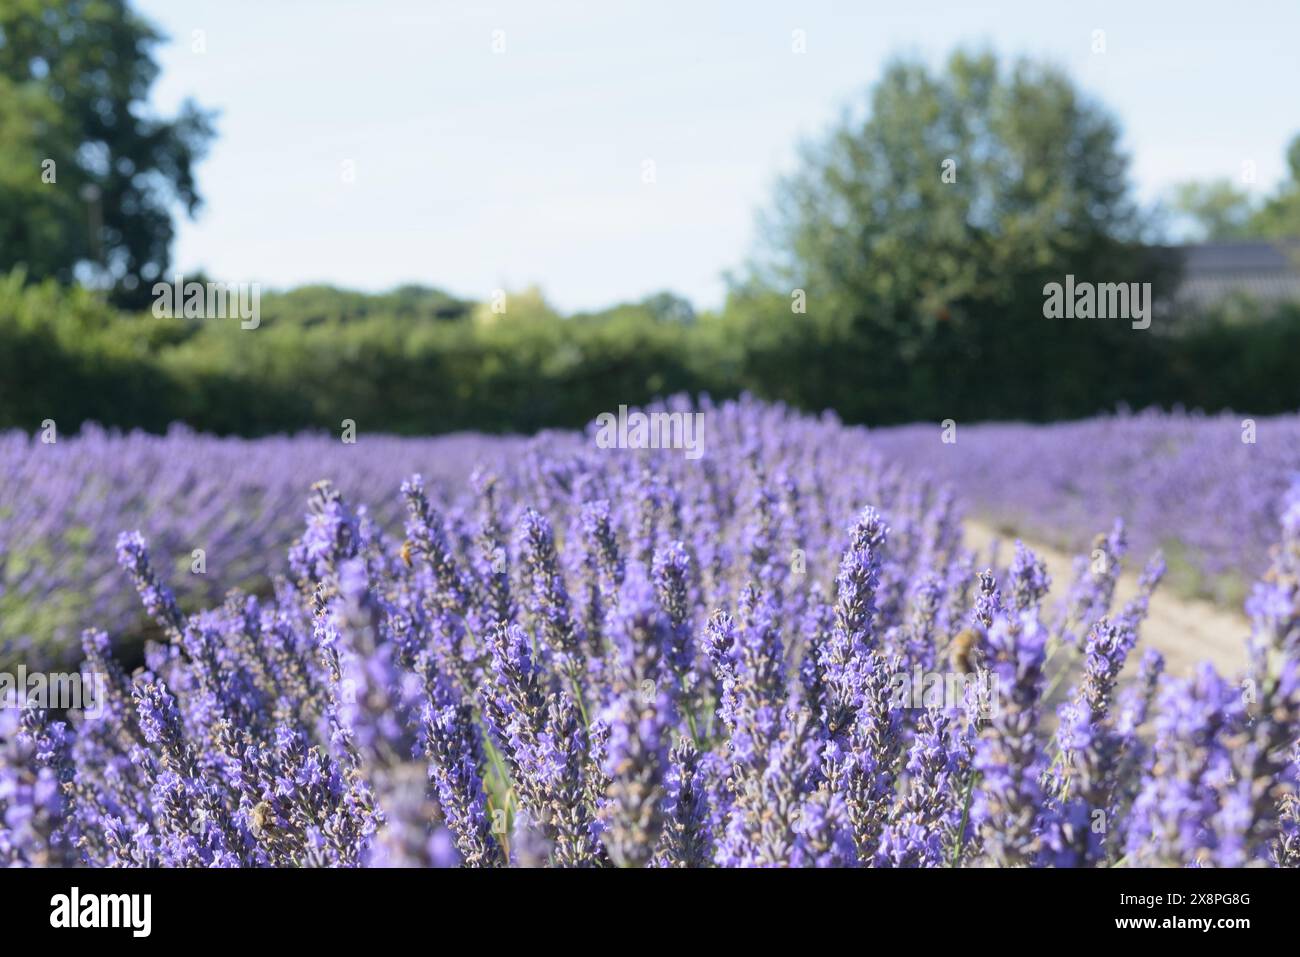 The aromatic lavender plants in the field in Europe. Blossom of fresh purple flowers in sunny day blue sky natural background wallpaper. Stock Photo